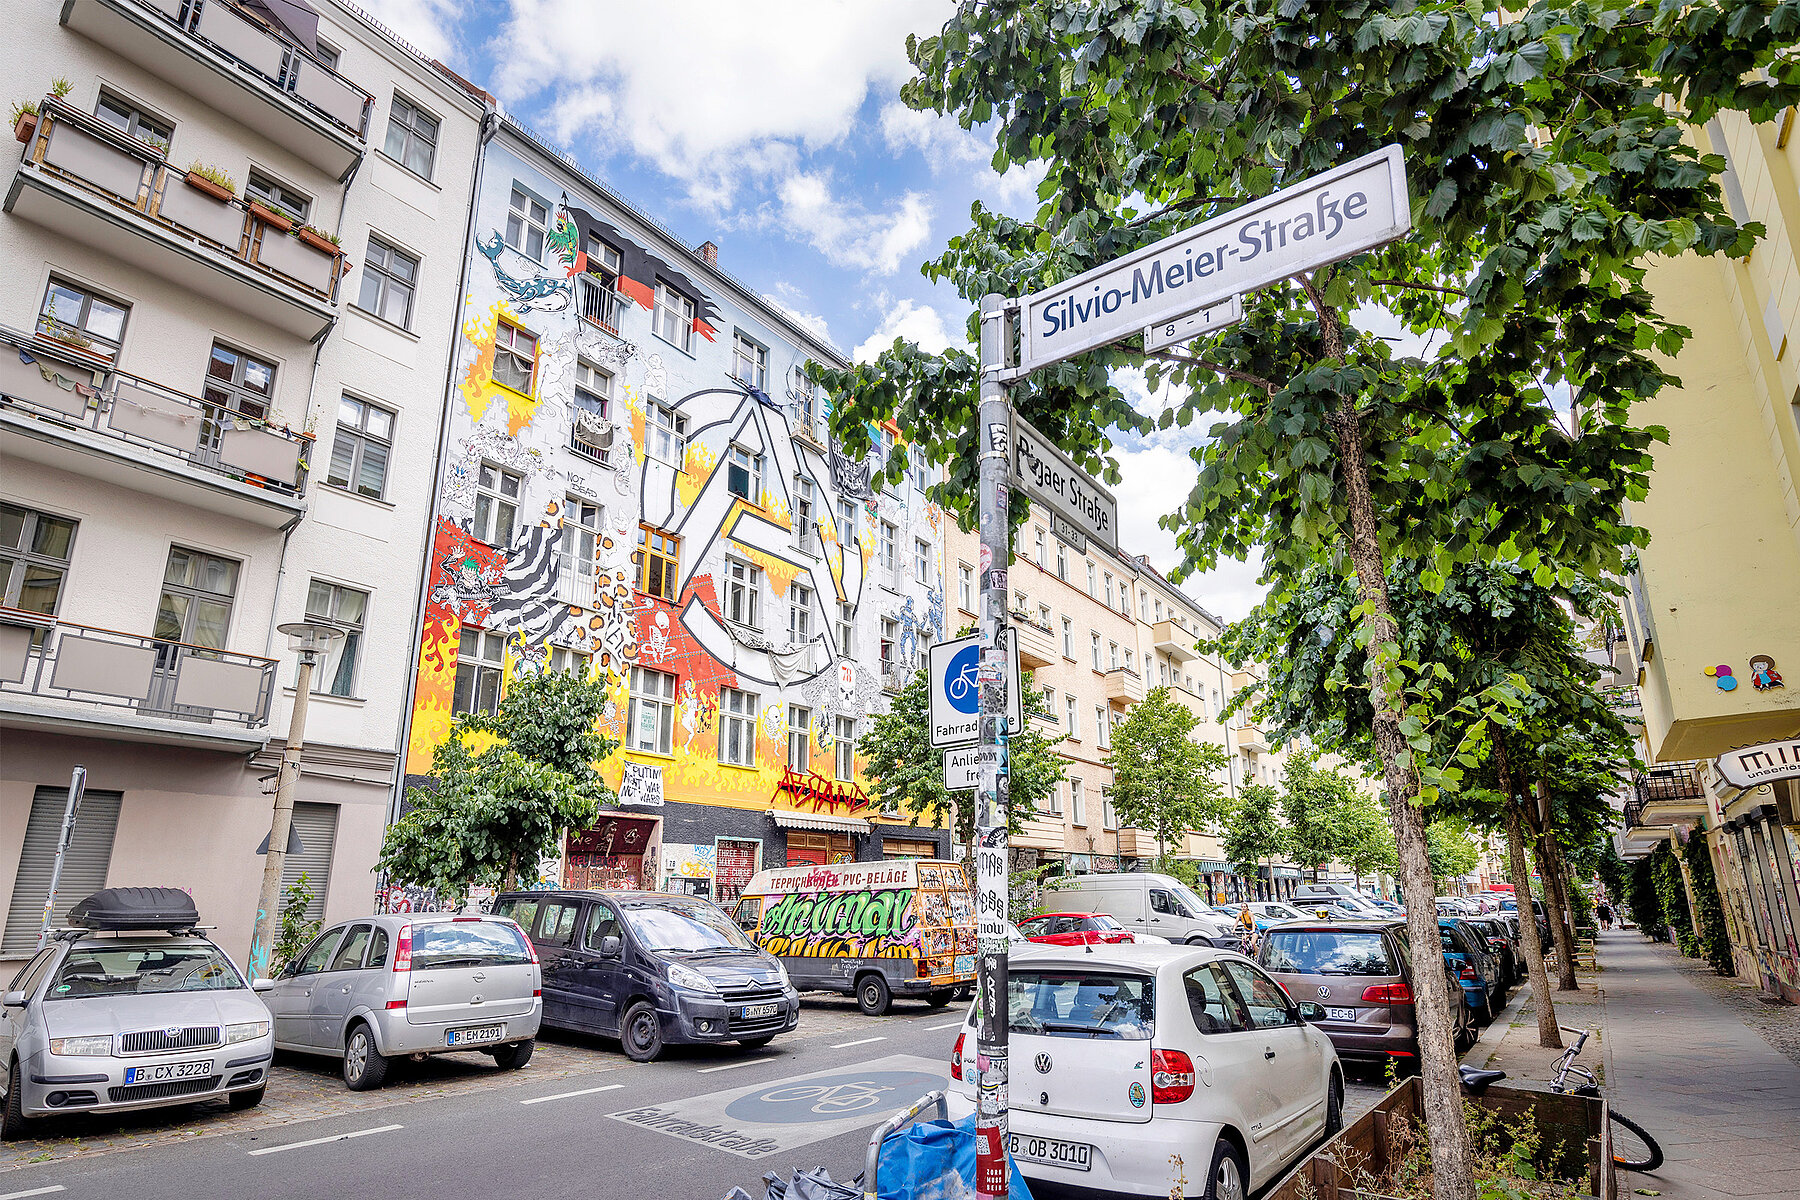 A street sign with the inscription Silvio-Meier-Straße. In the background is the colourfully painted house of a housing project at Rigaer Straße.